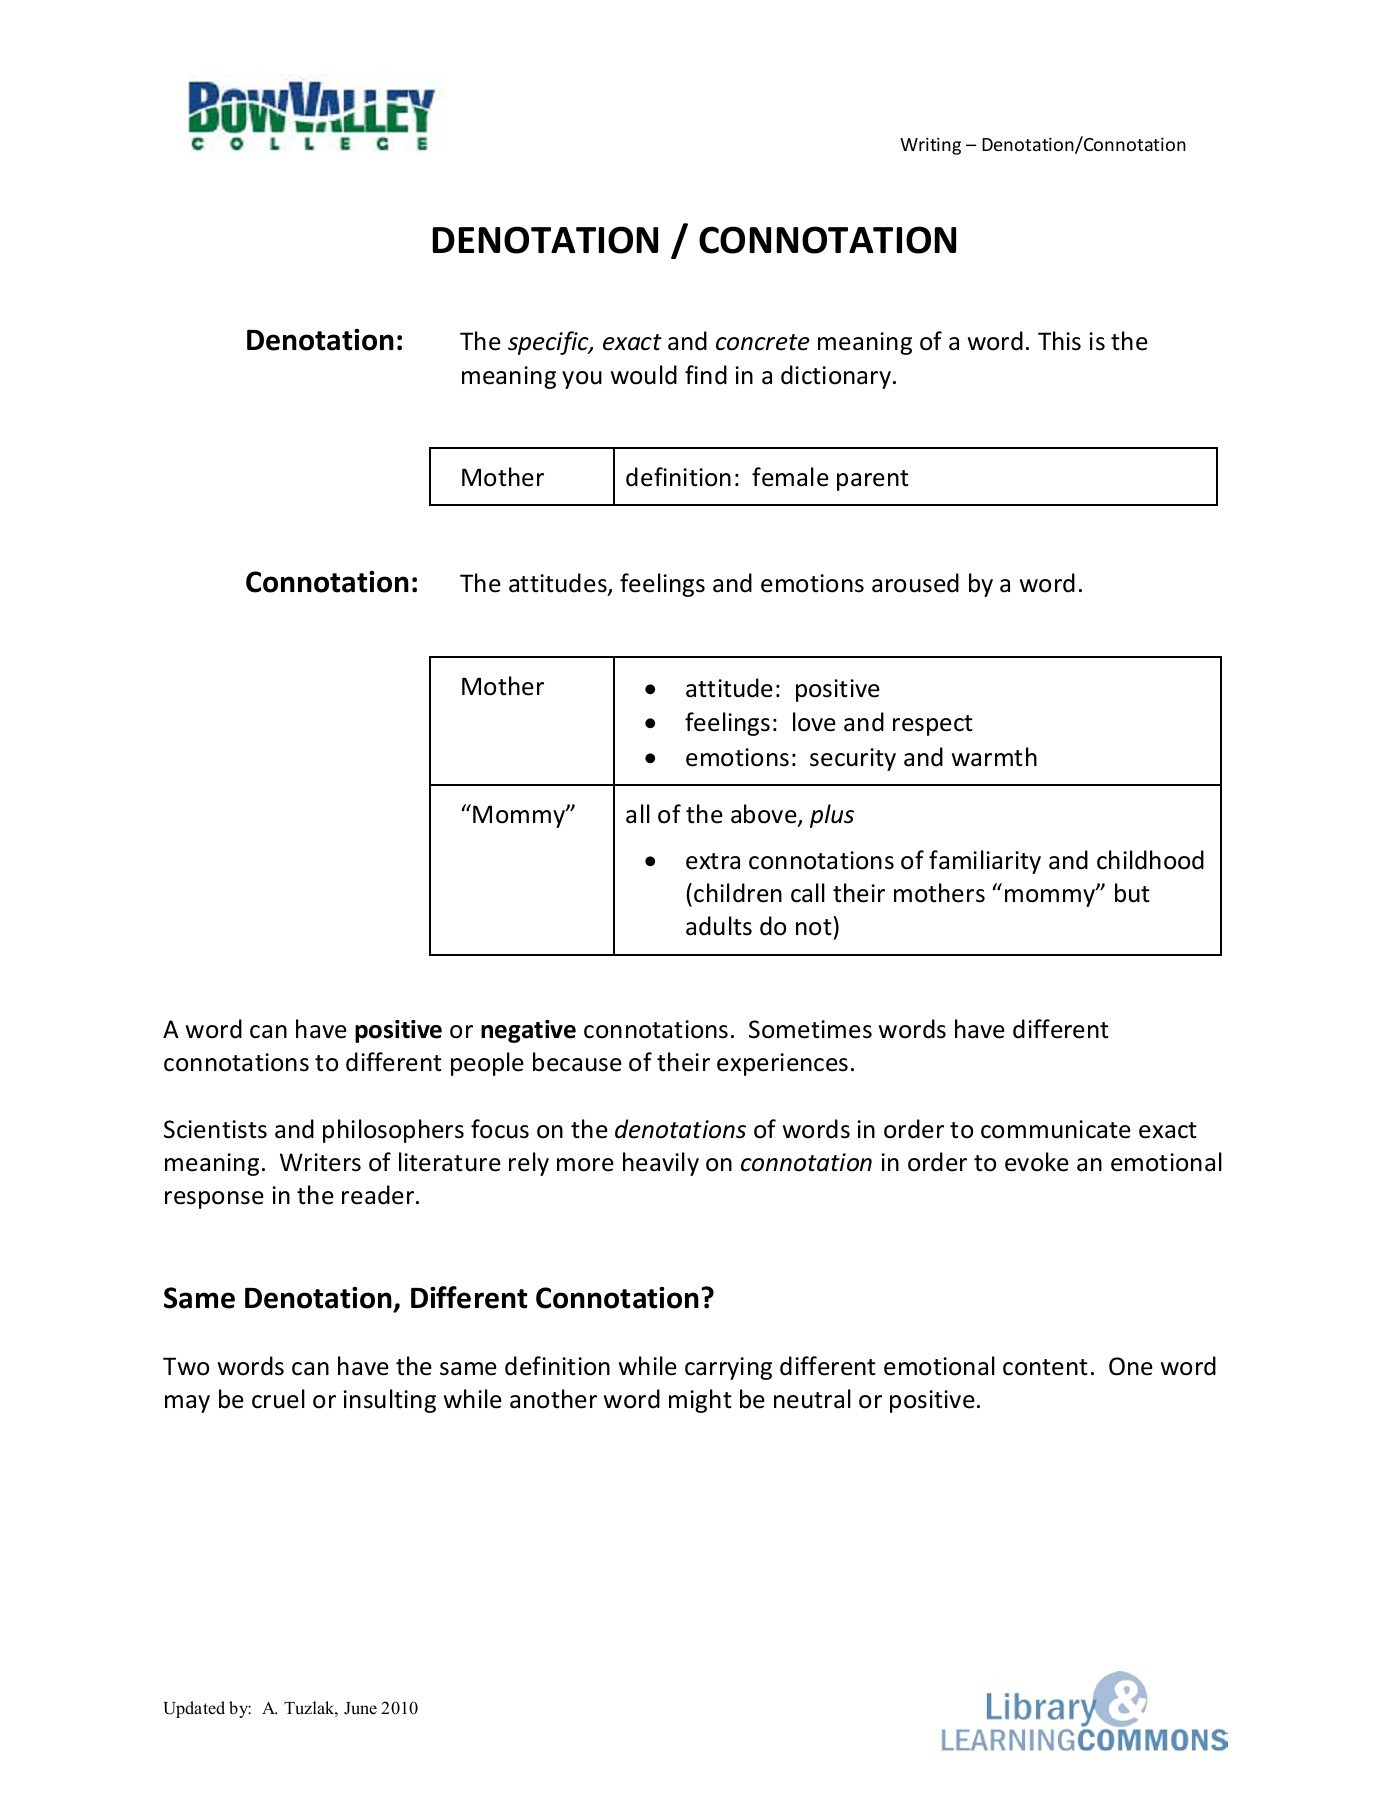 Denotation and Connotation Worksheet Denotation and Connotation Bow Valley College Pages 1 6